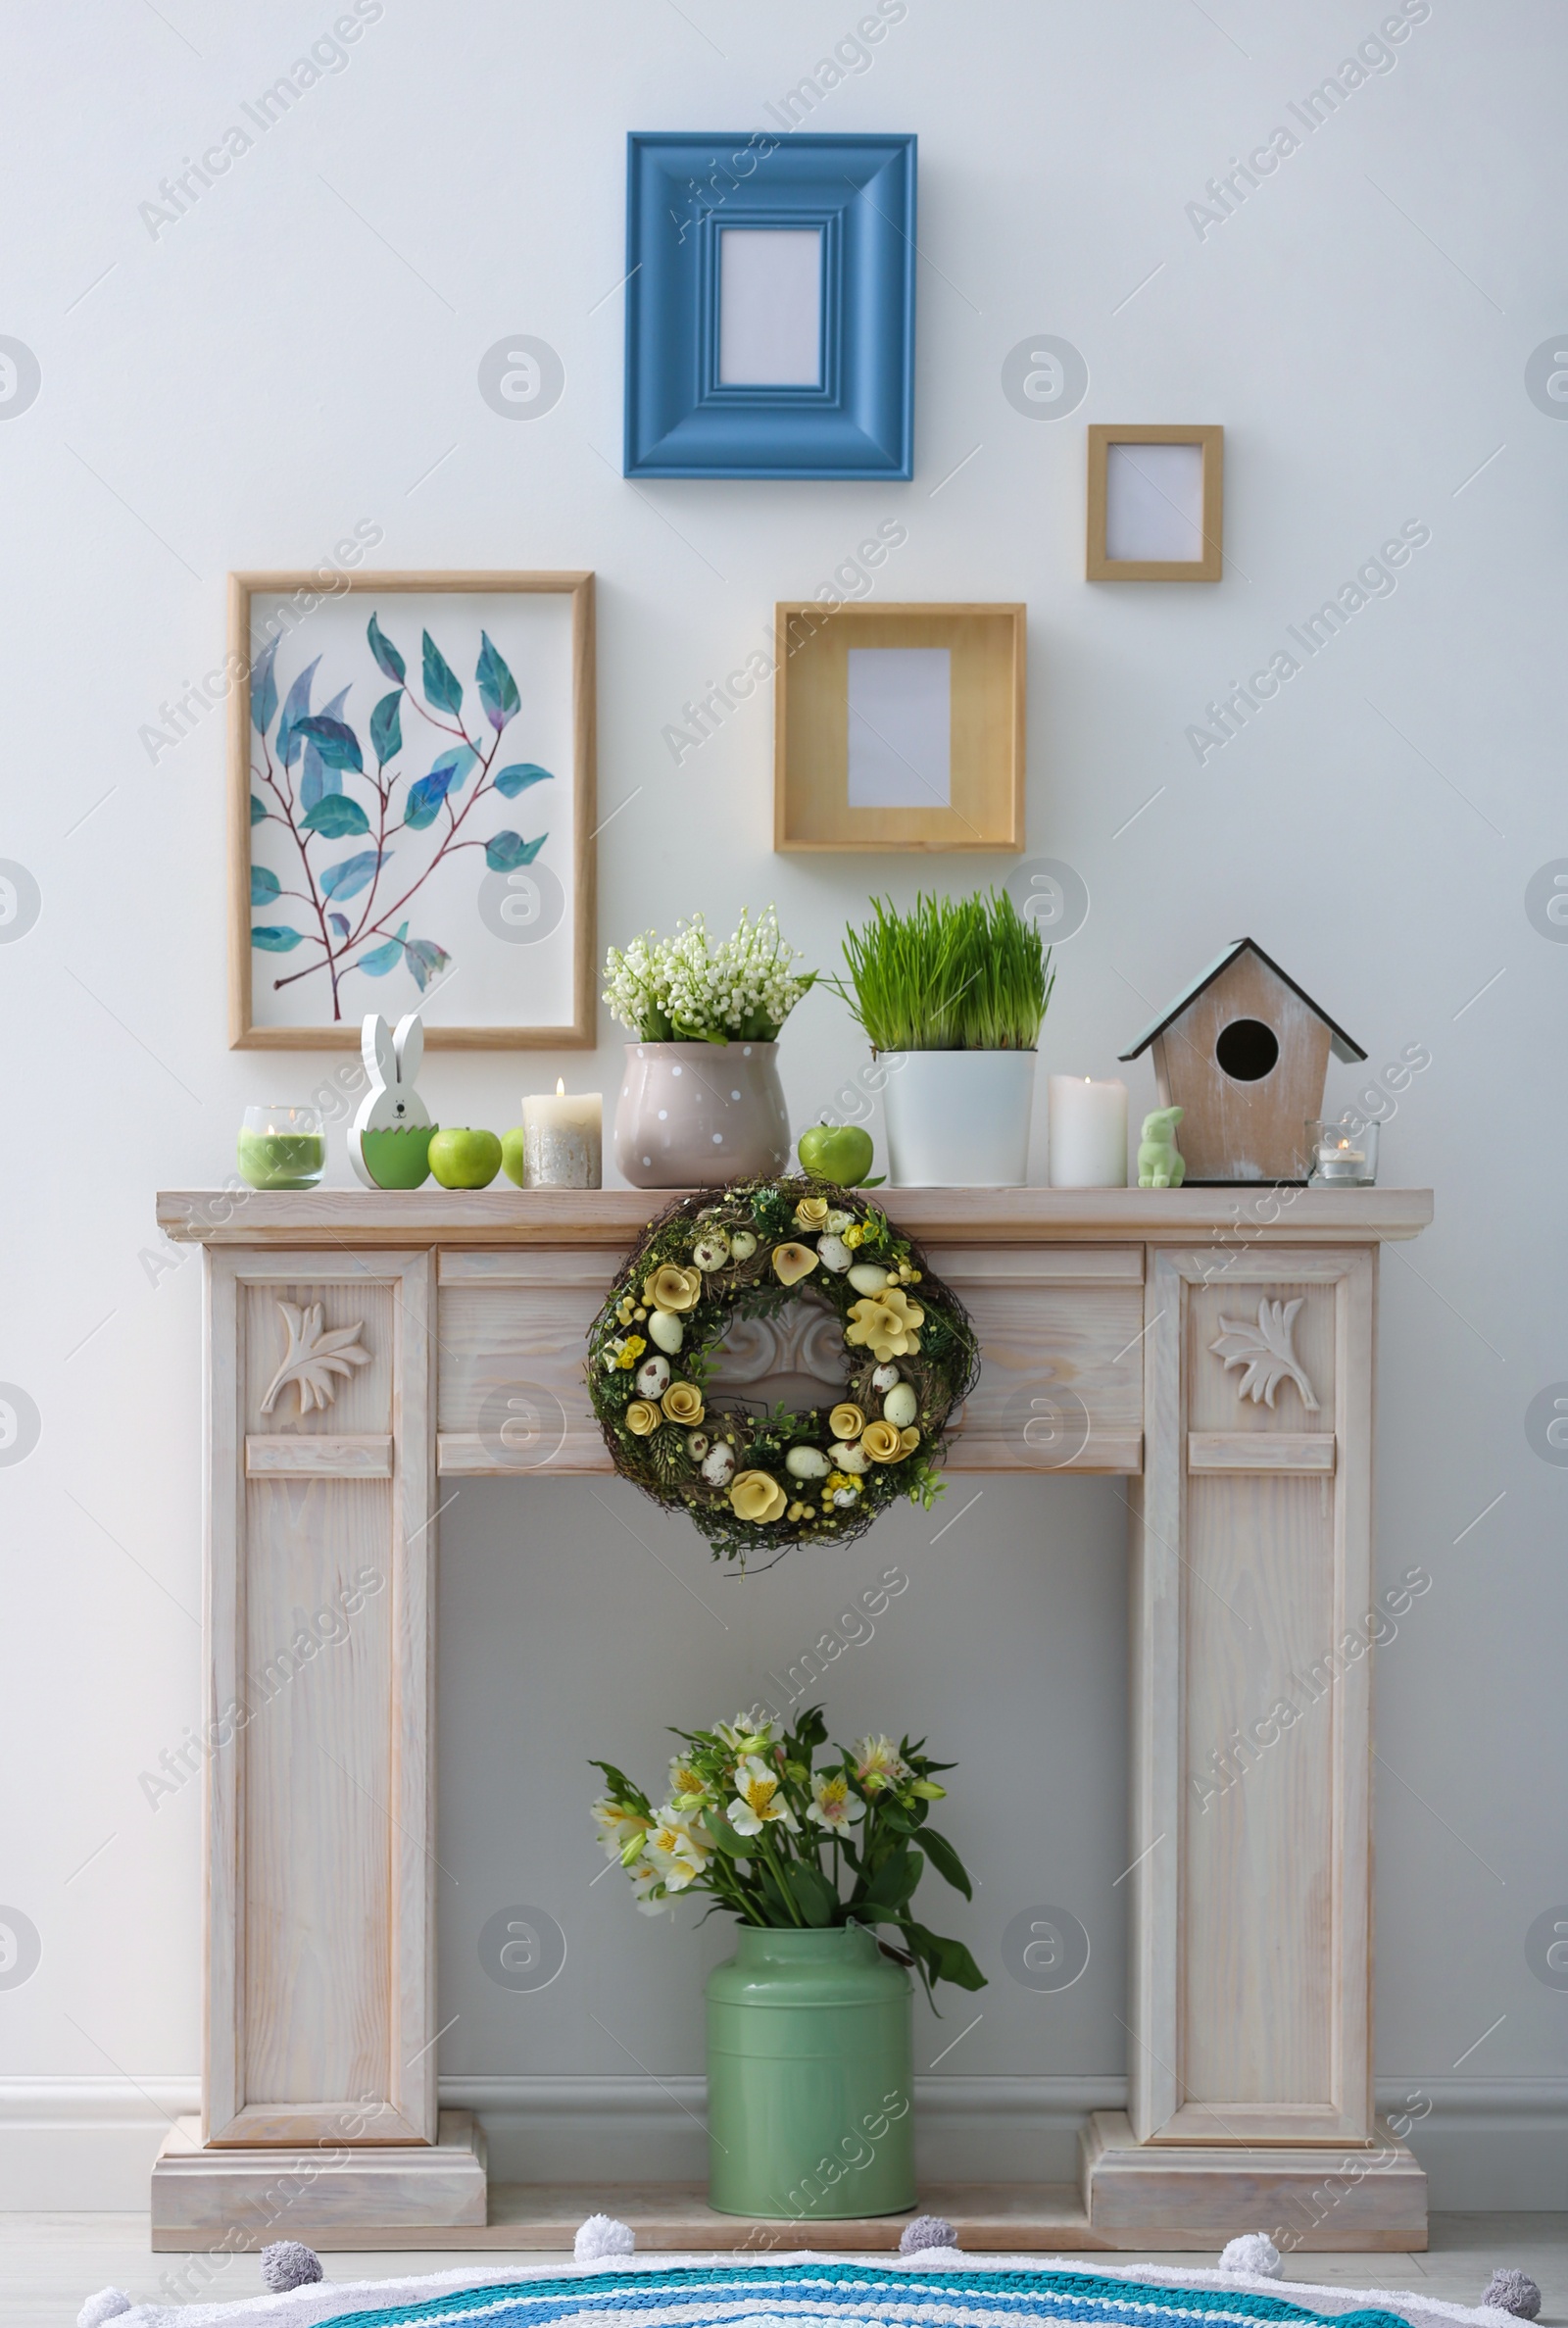 Photo of Decorative fireplace with beautiful spring decor indoors. Interior design